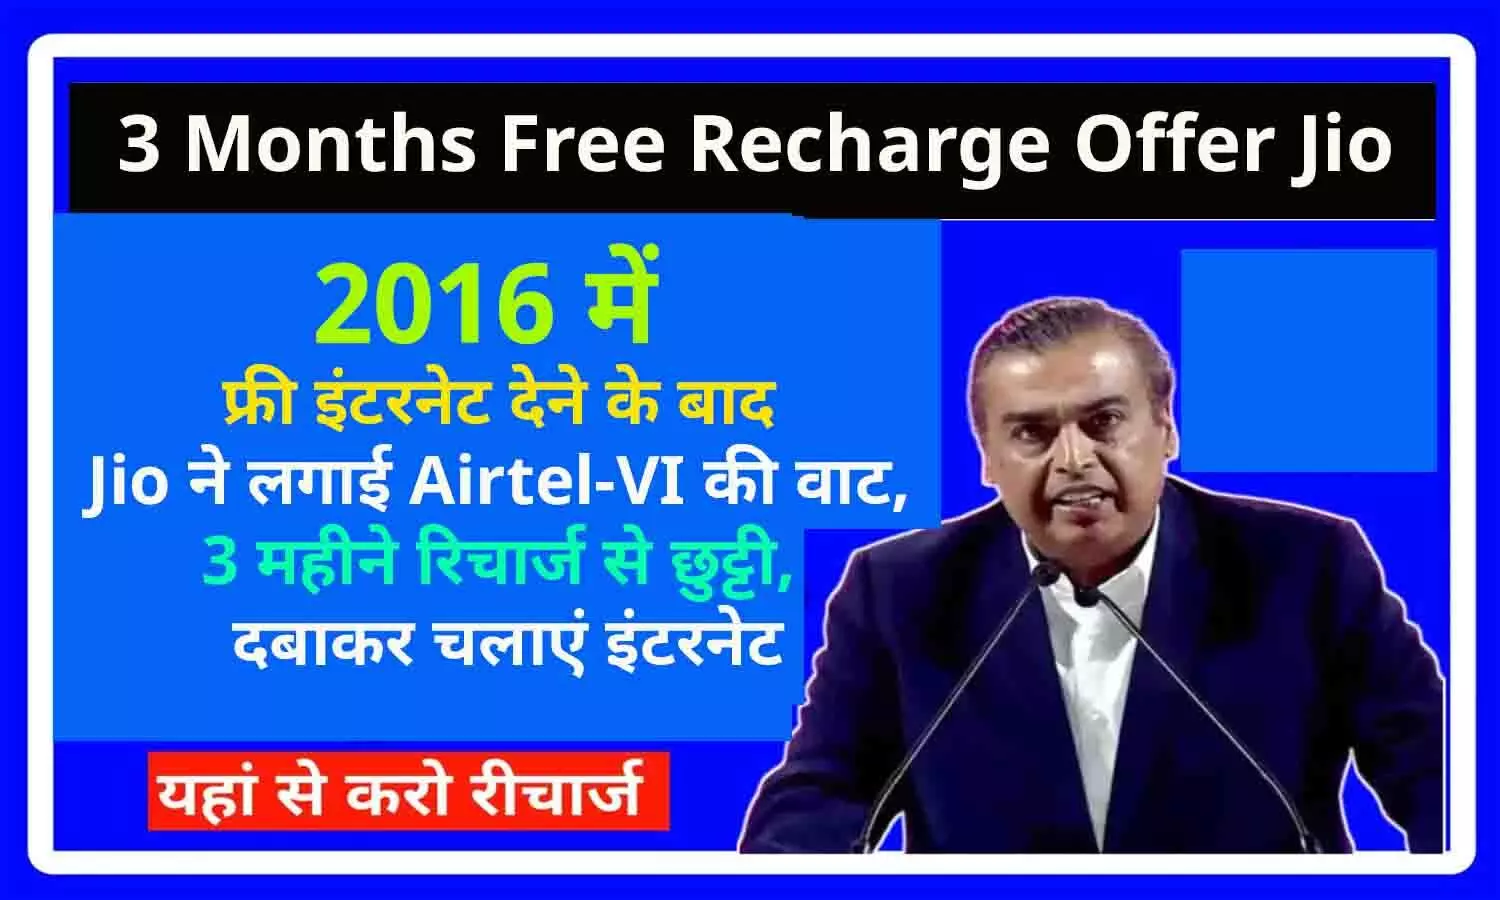 3 Months Free Recharge Offer Jio